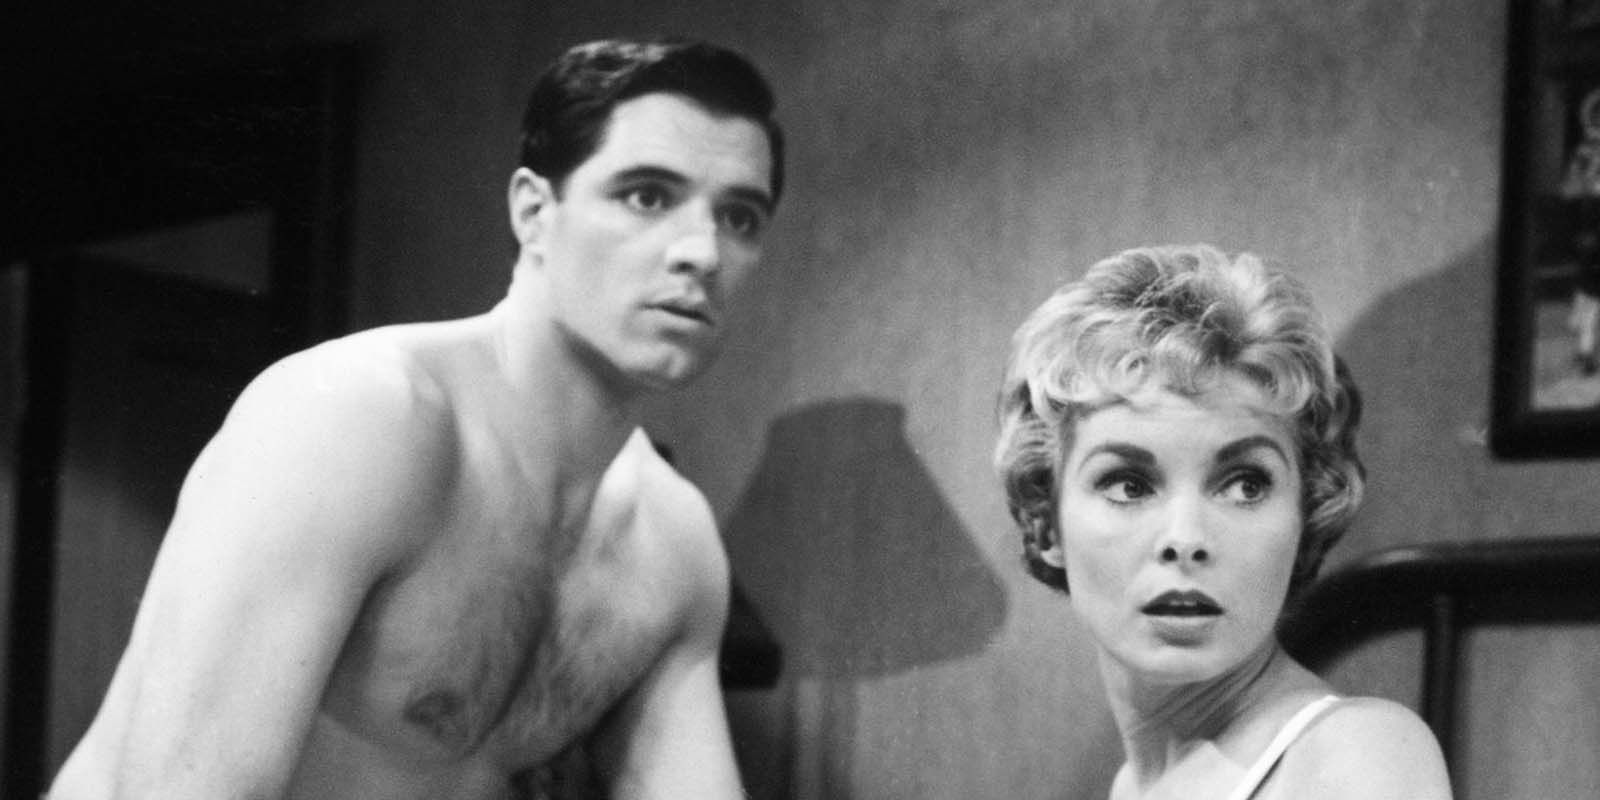 Sam Loomis and Marion Crane in the hotel room looking scared in Psycho.